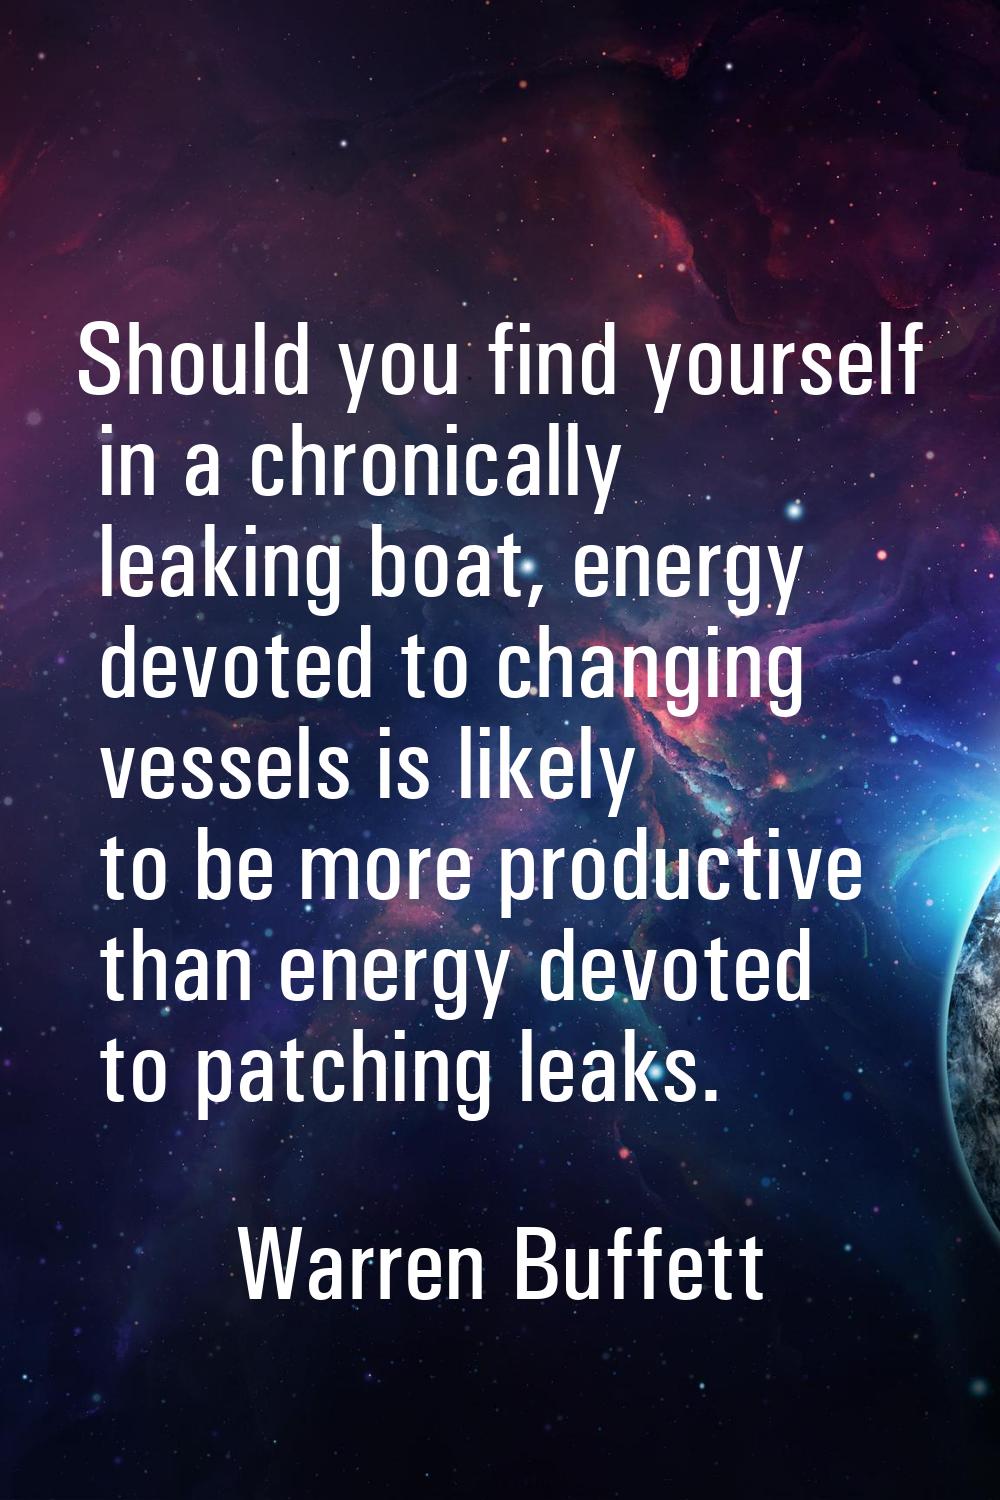 Should you find yourself in a chronically leaking boat, energy devoted to changing vessels is likel